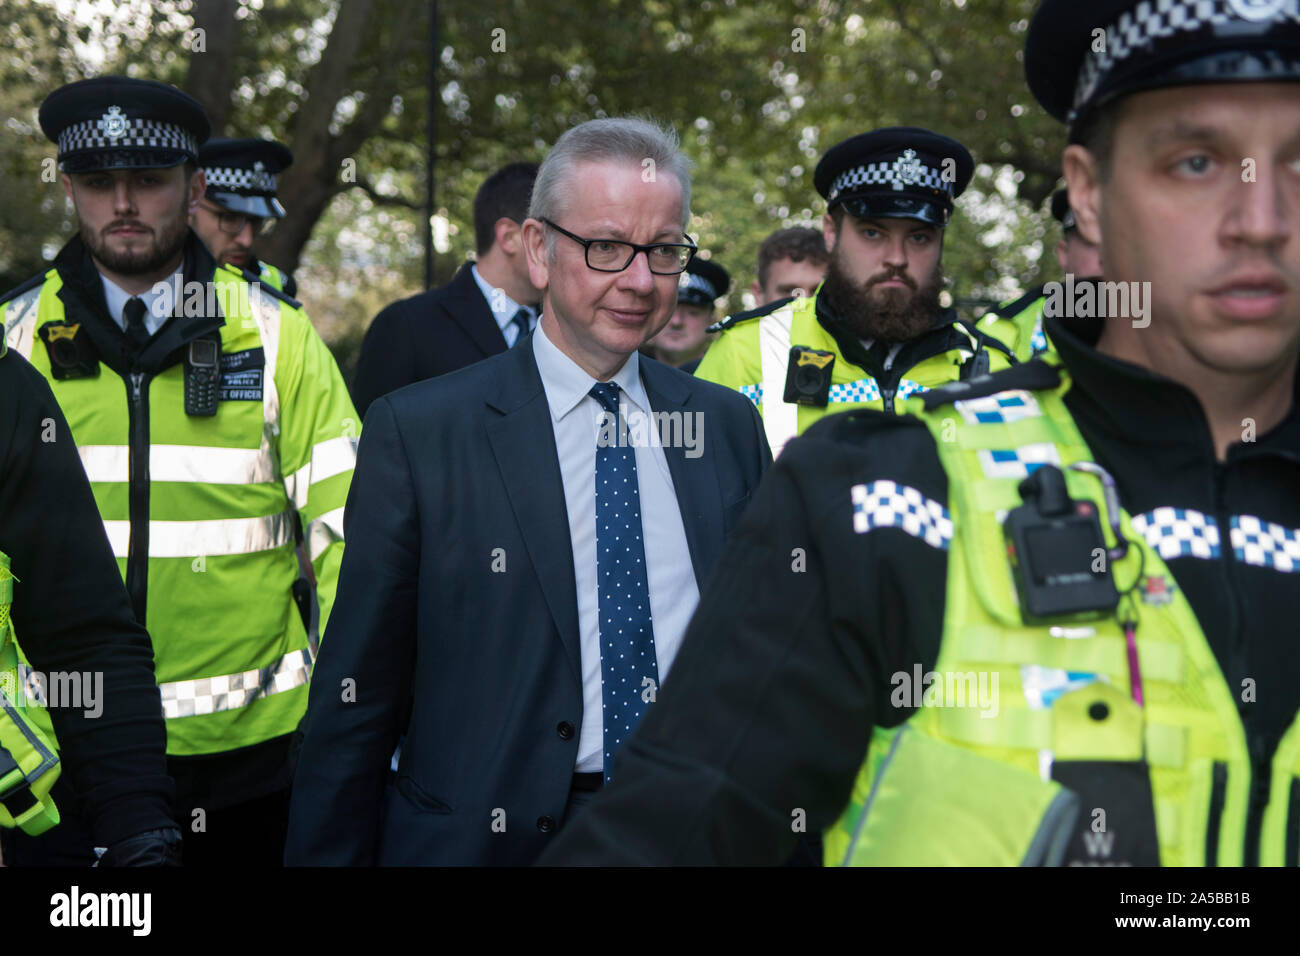 Michael Gove MP needs police protection when he leaves the House of Commons after the Brexit debate on Super Saturday 19th October 2019. Threatening verbal abusive language shouted at MPs. London, England  UK 2010s HOMER SYKES Stock Photo